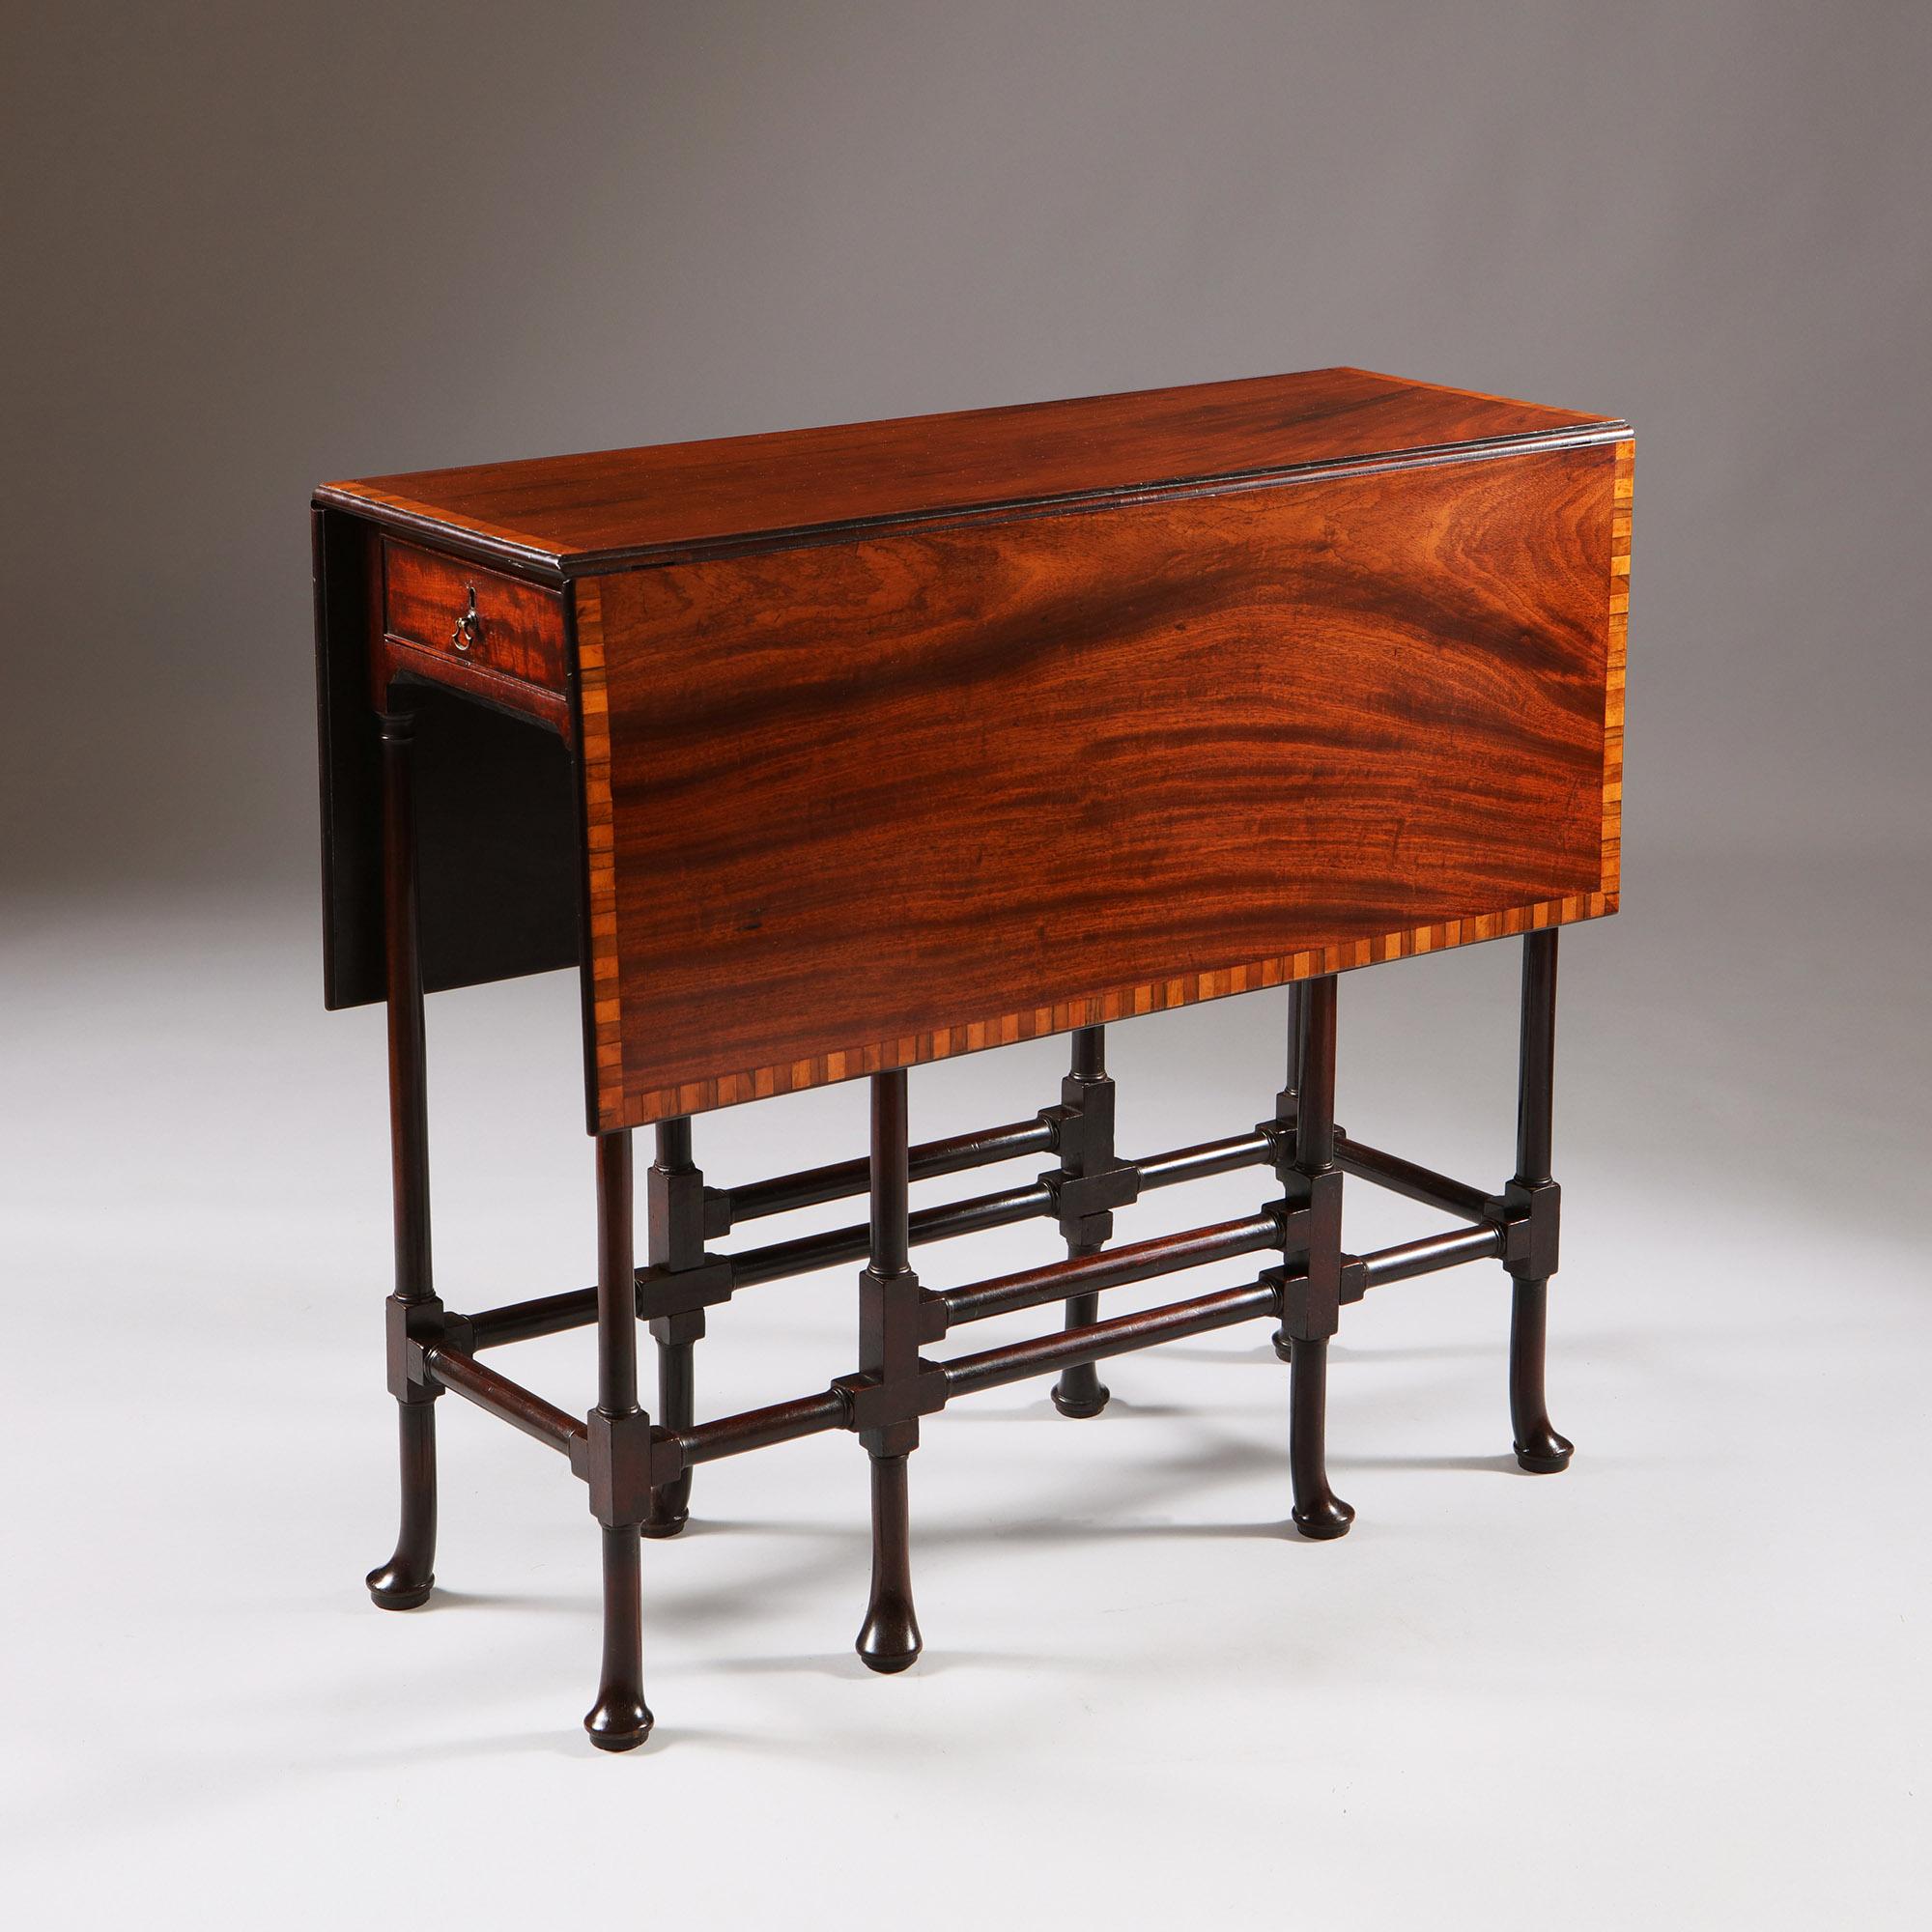 An Important George III mahogany spider-leg table attributed to Thomas Chippendale
1768. England

The tulip banded rectangular mahogany drop-leaf top with gateleg action, on a straight mahogany frieze with oak lined cockbeeded drawers to each short